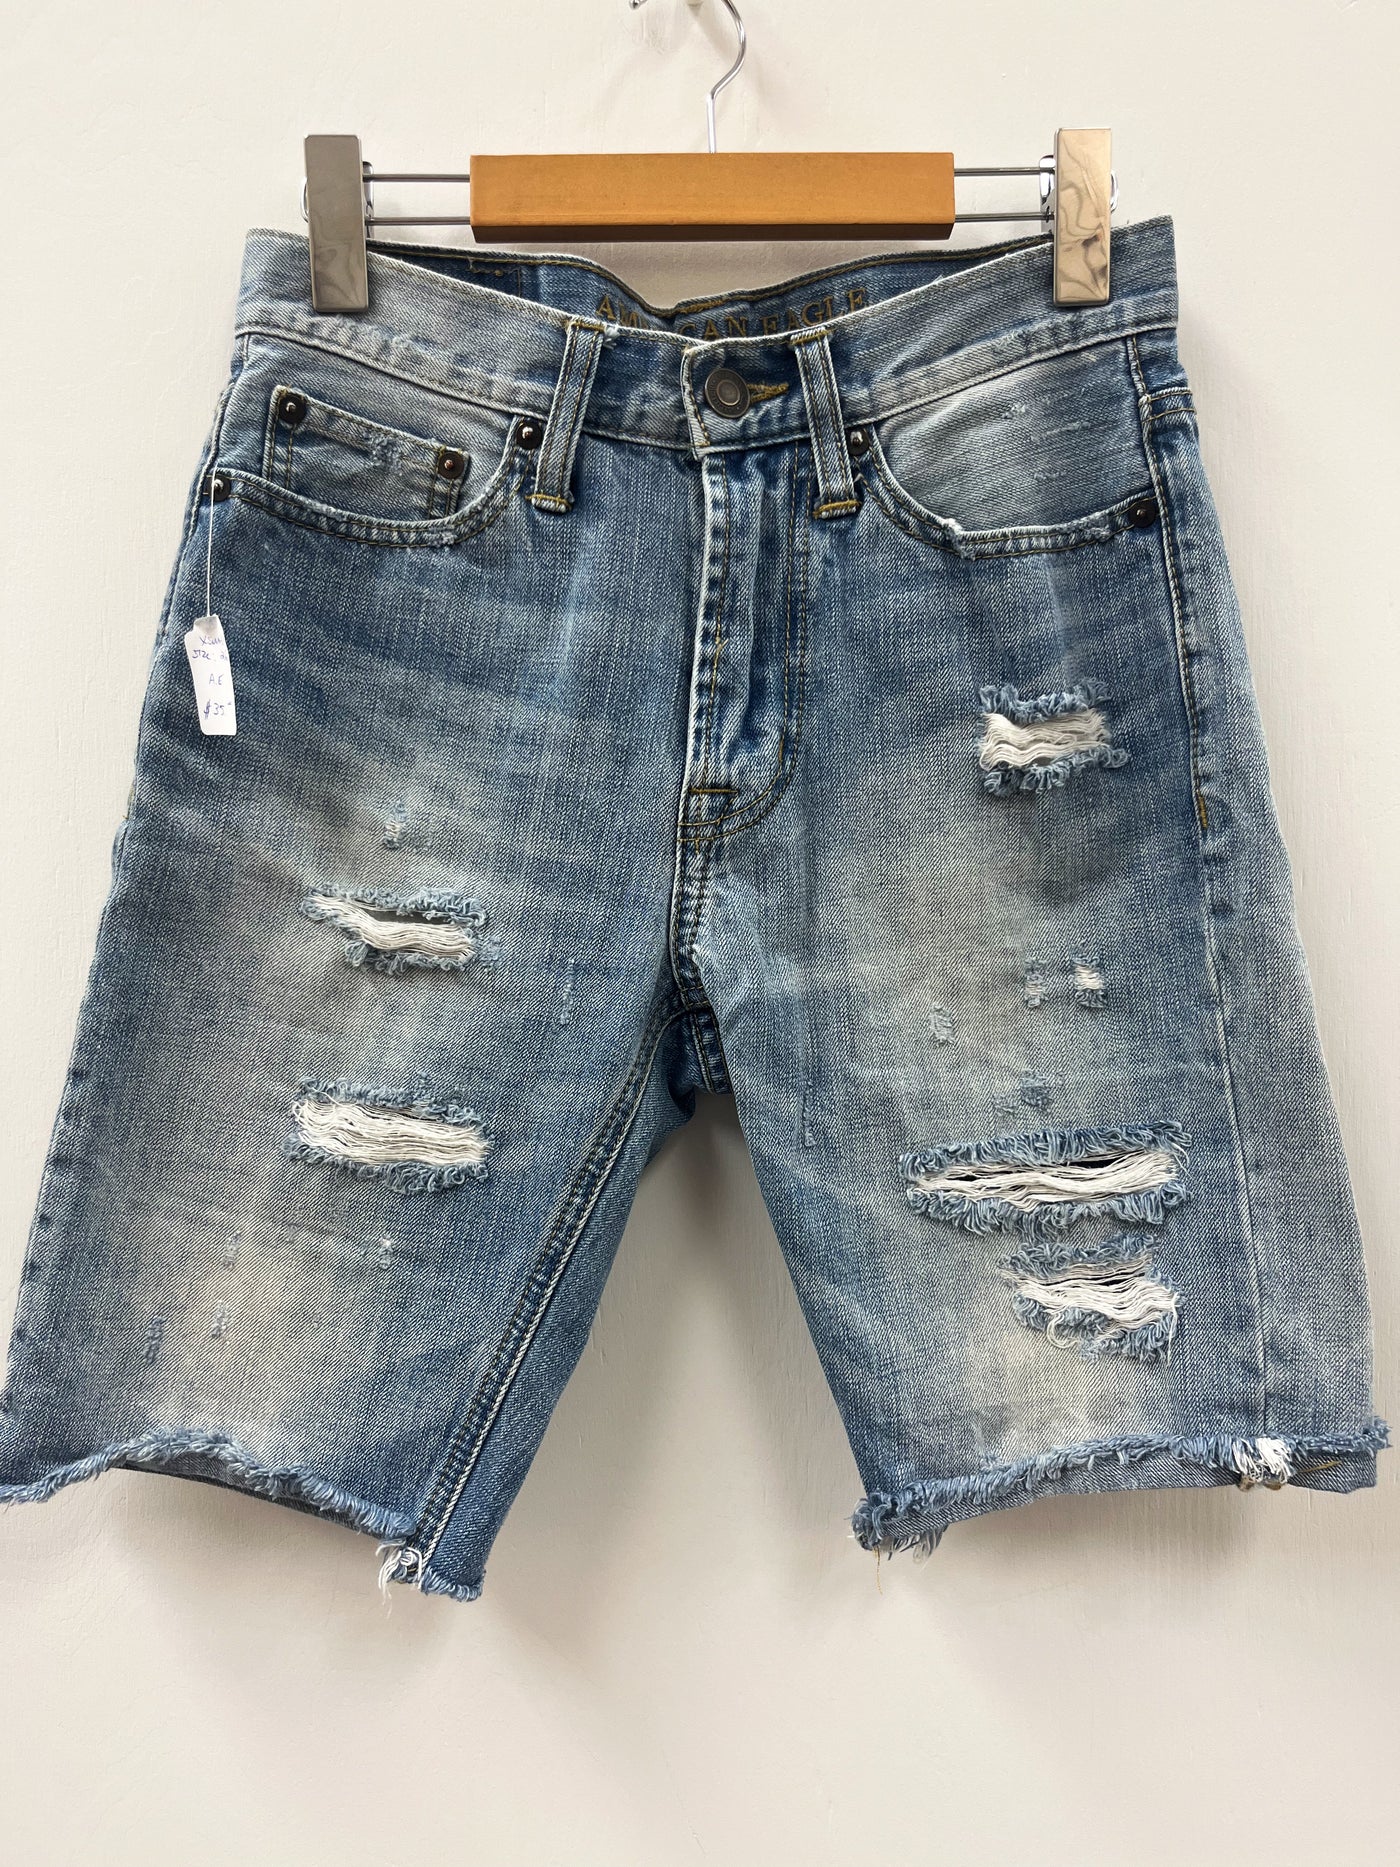 American Eagle outfitters denim shorts